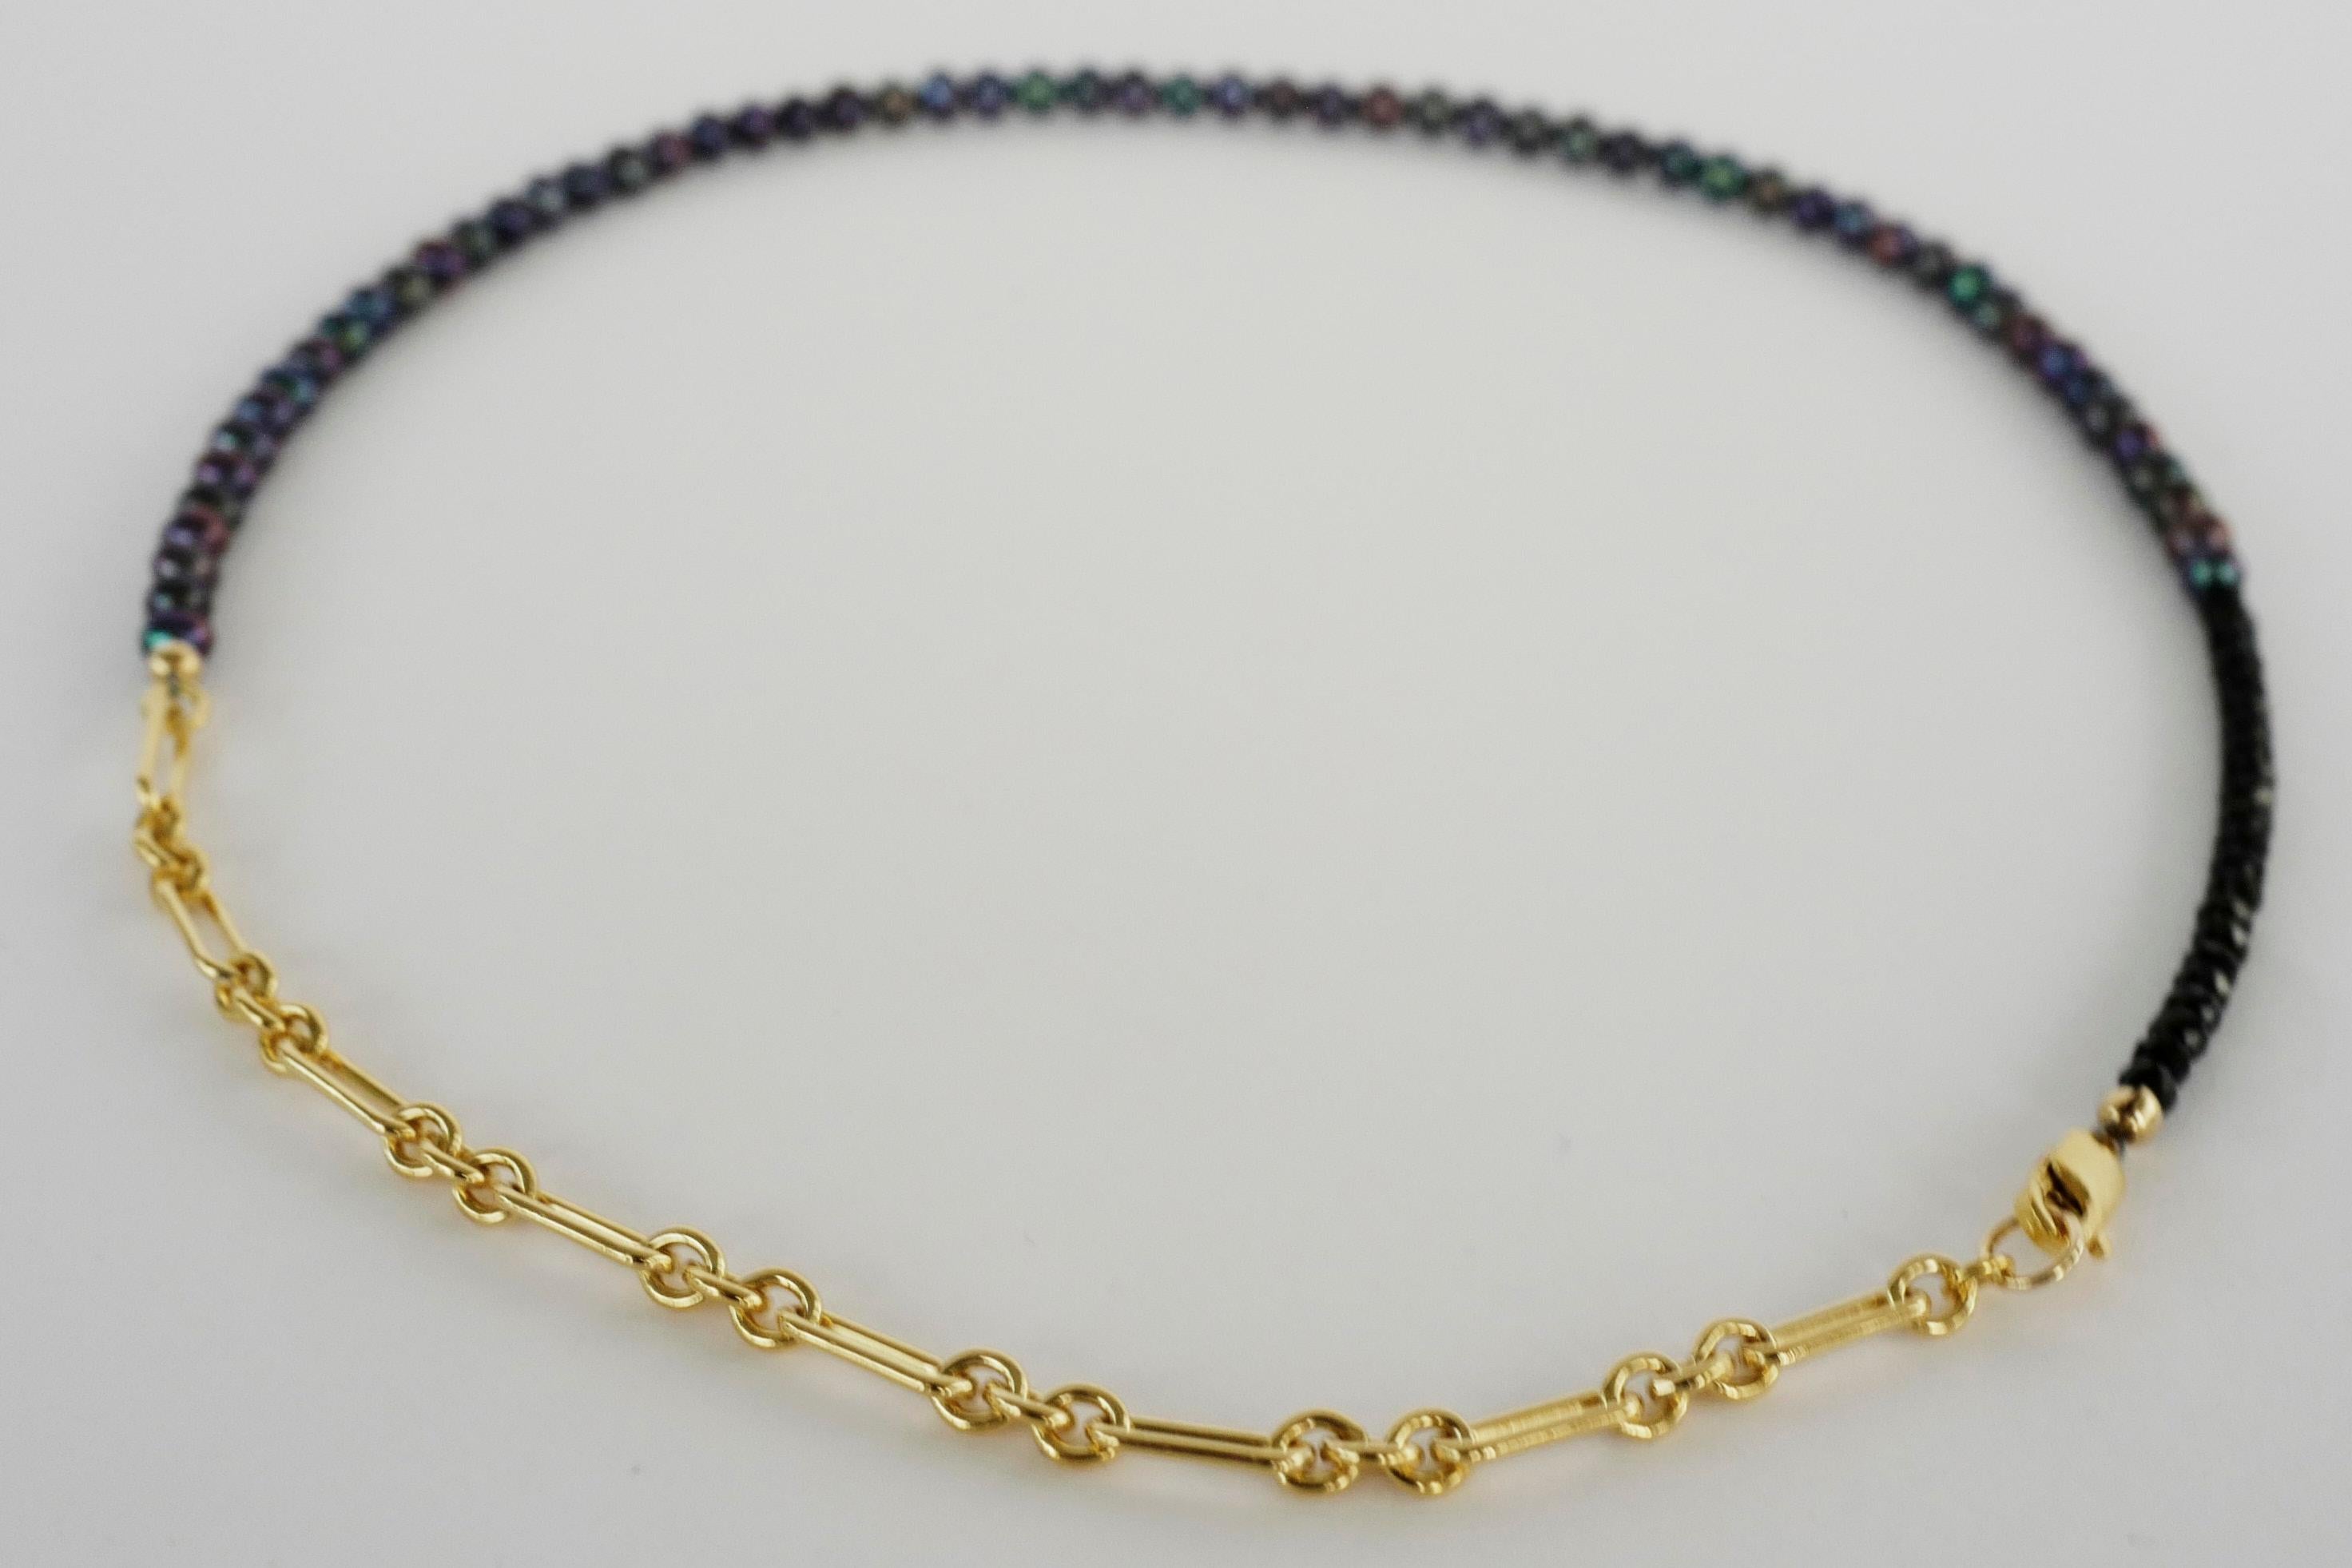 Women's Black Pearl Beaded Choker Necklace Black Spinel Gold Filled Chain J Dauphin